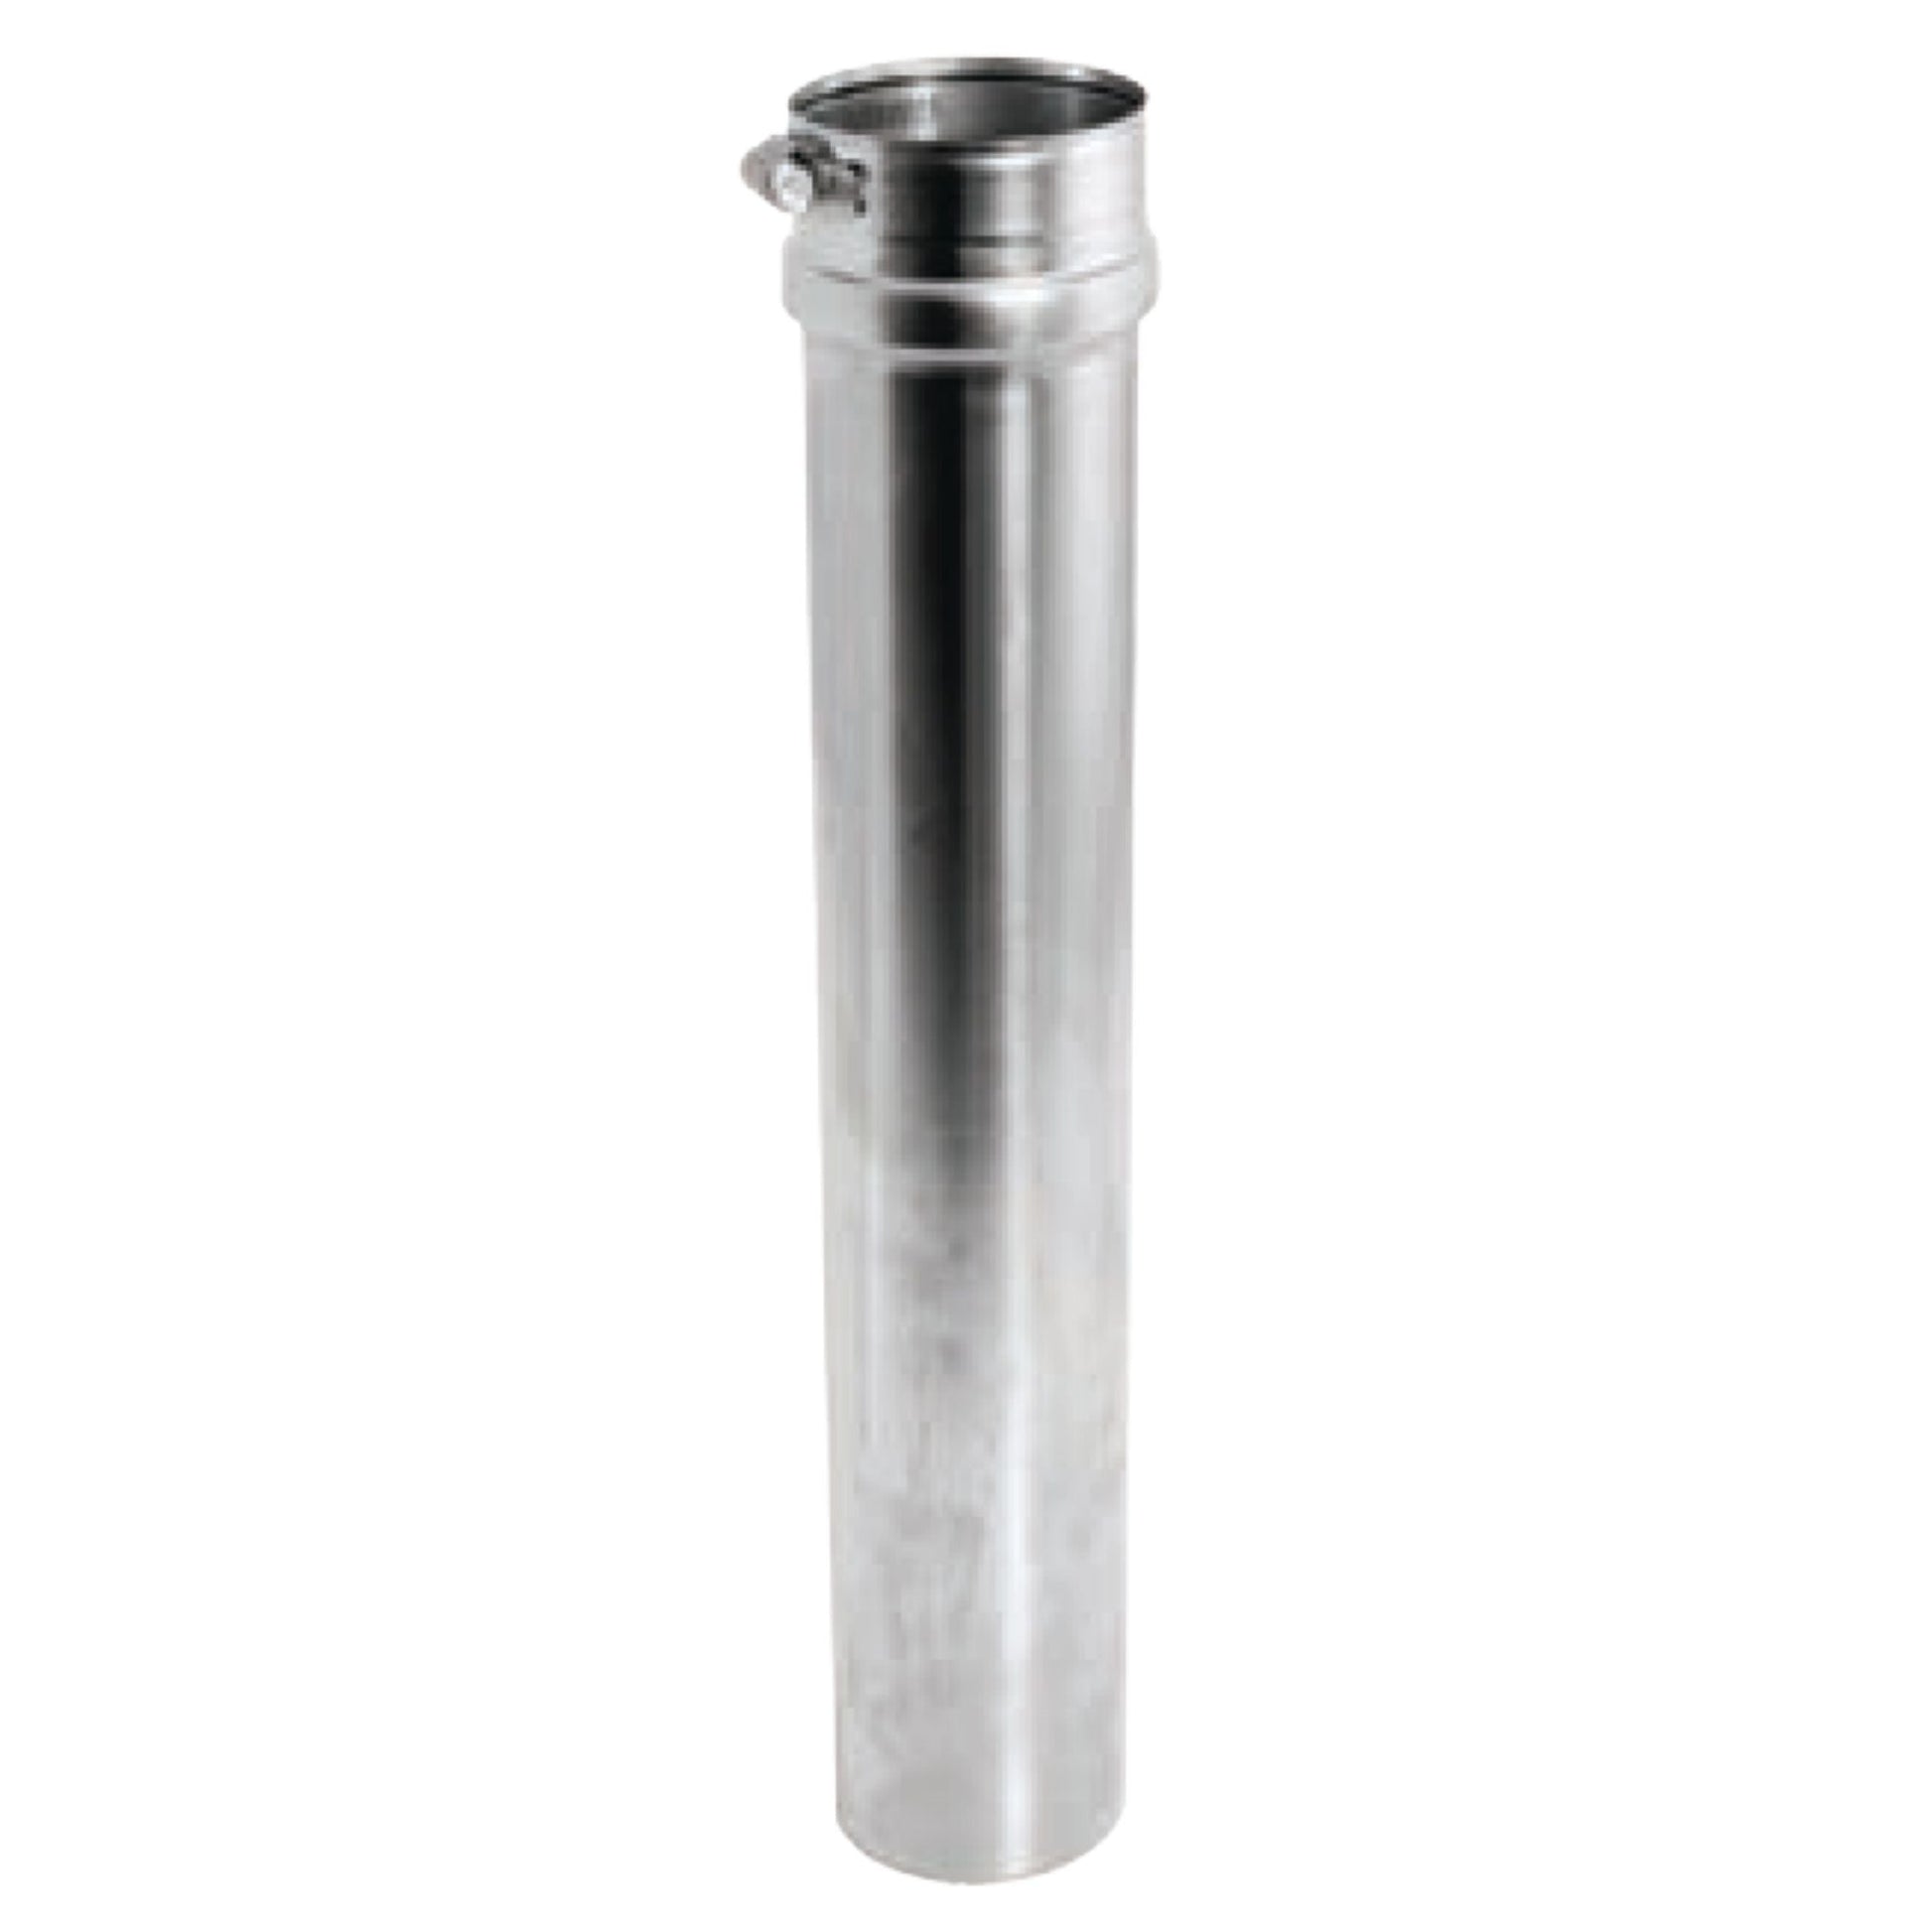 DuraVent FasNSeal 5" x 18" 29-4C Stainless Steel Adjustable Vent Length